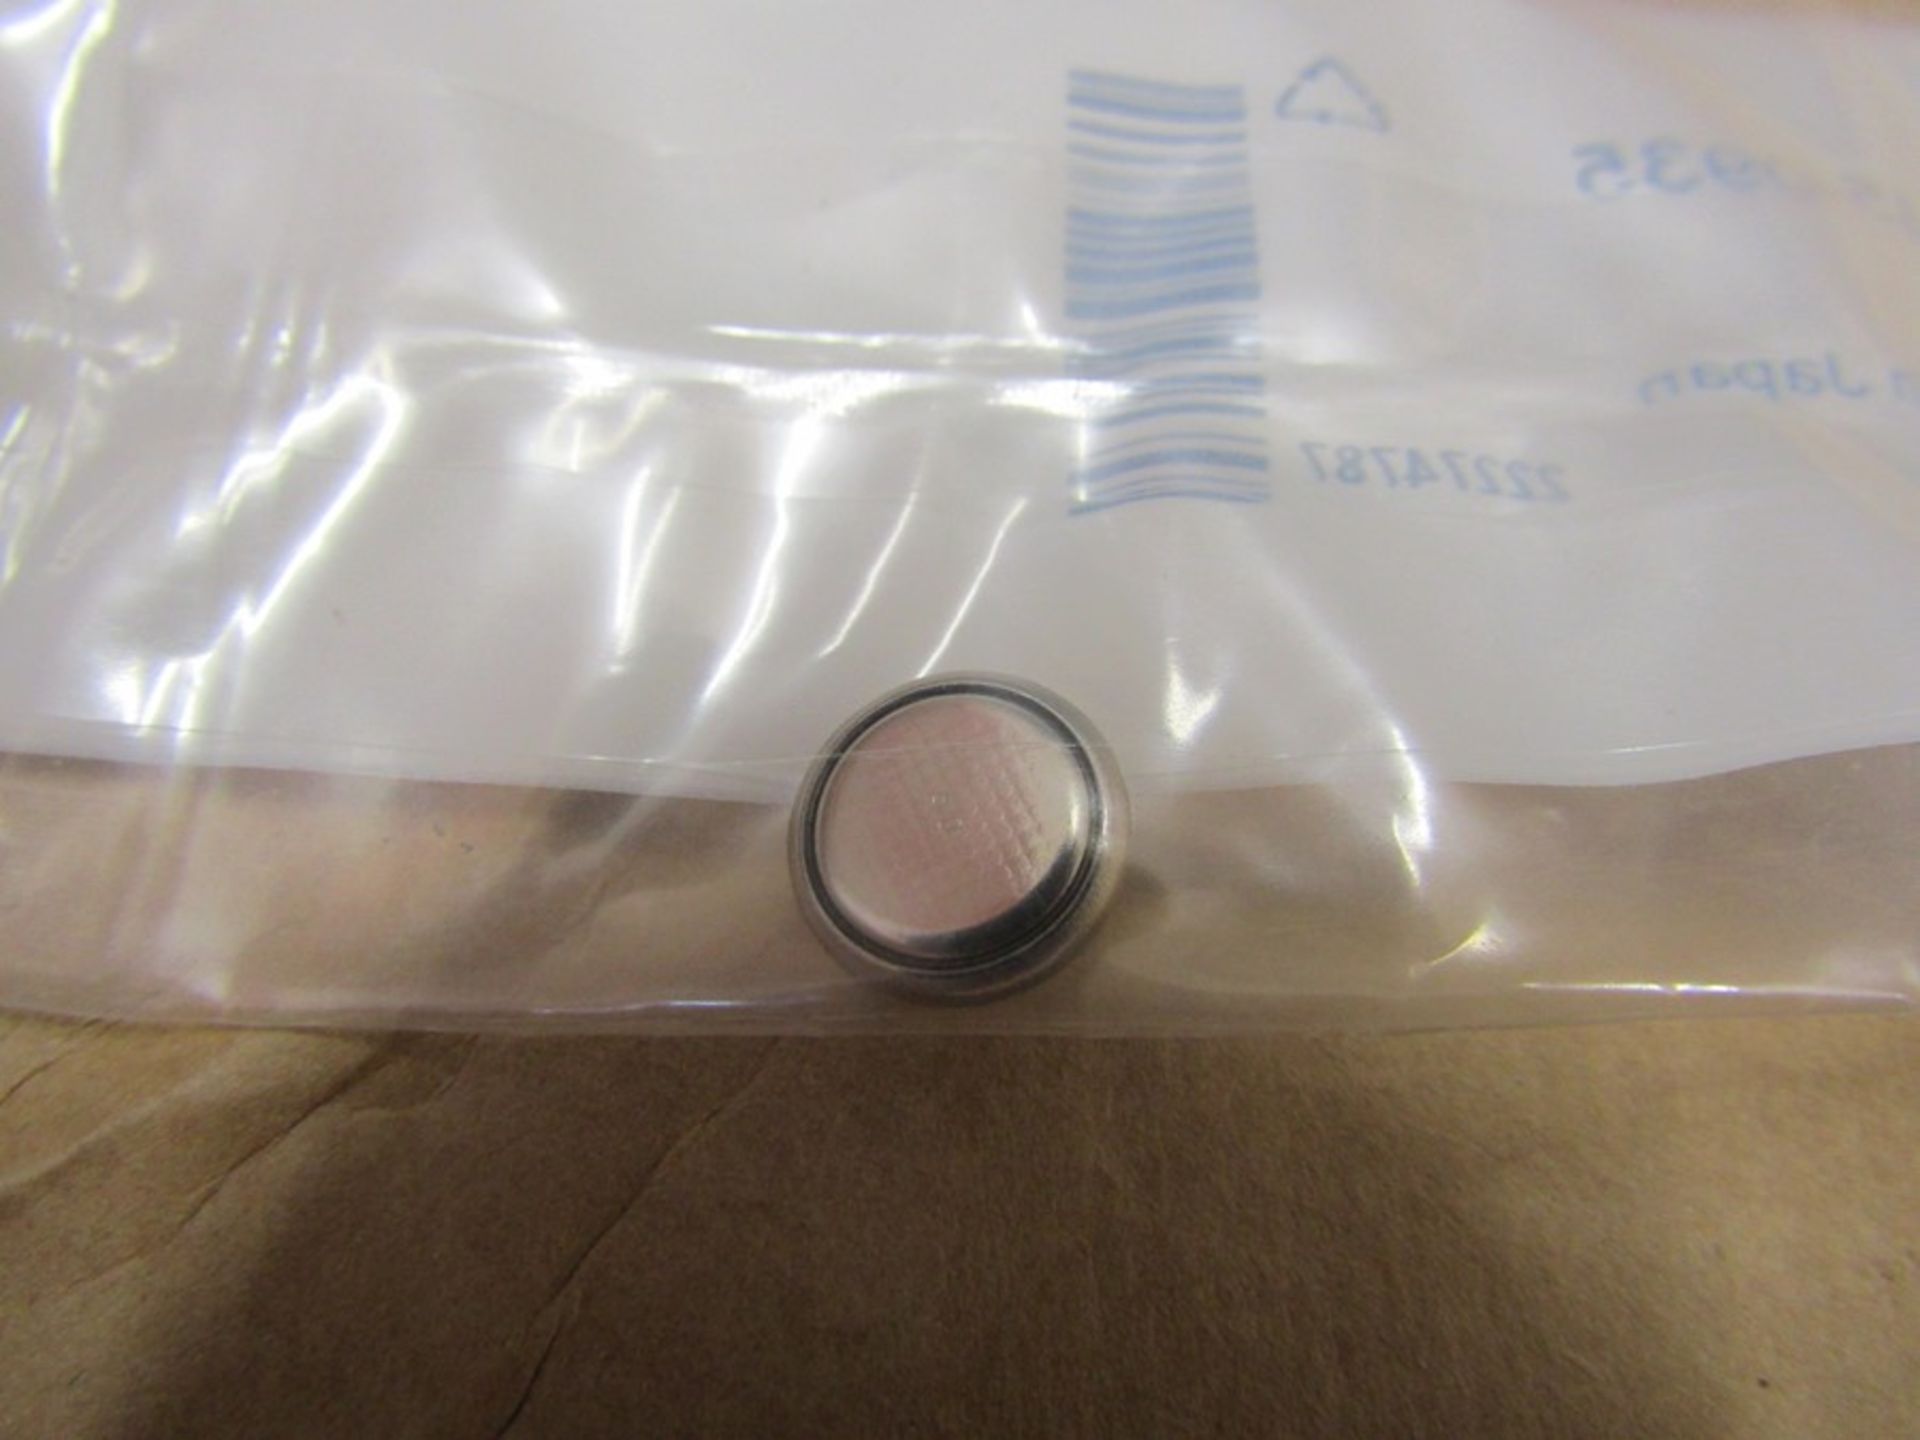 Around 80 Lithium Coin BR1220 Battery Cells